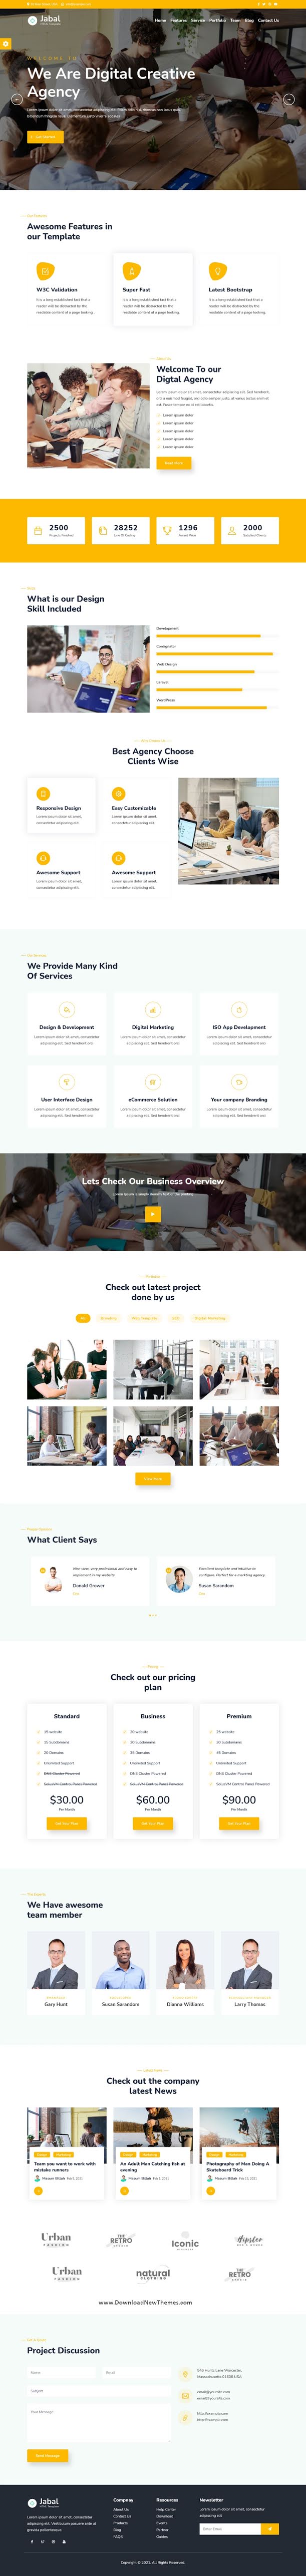 Digital Agency One Page Bootstrap Template